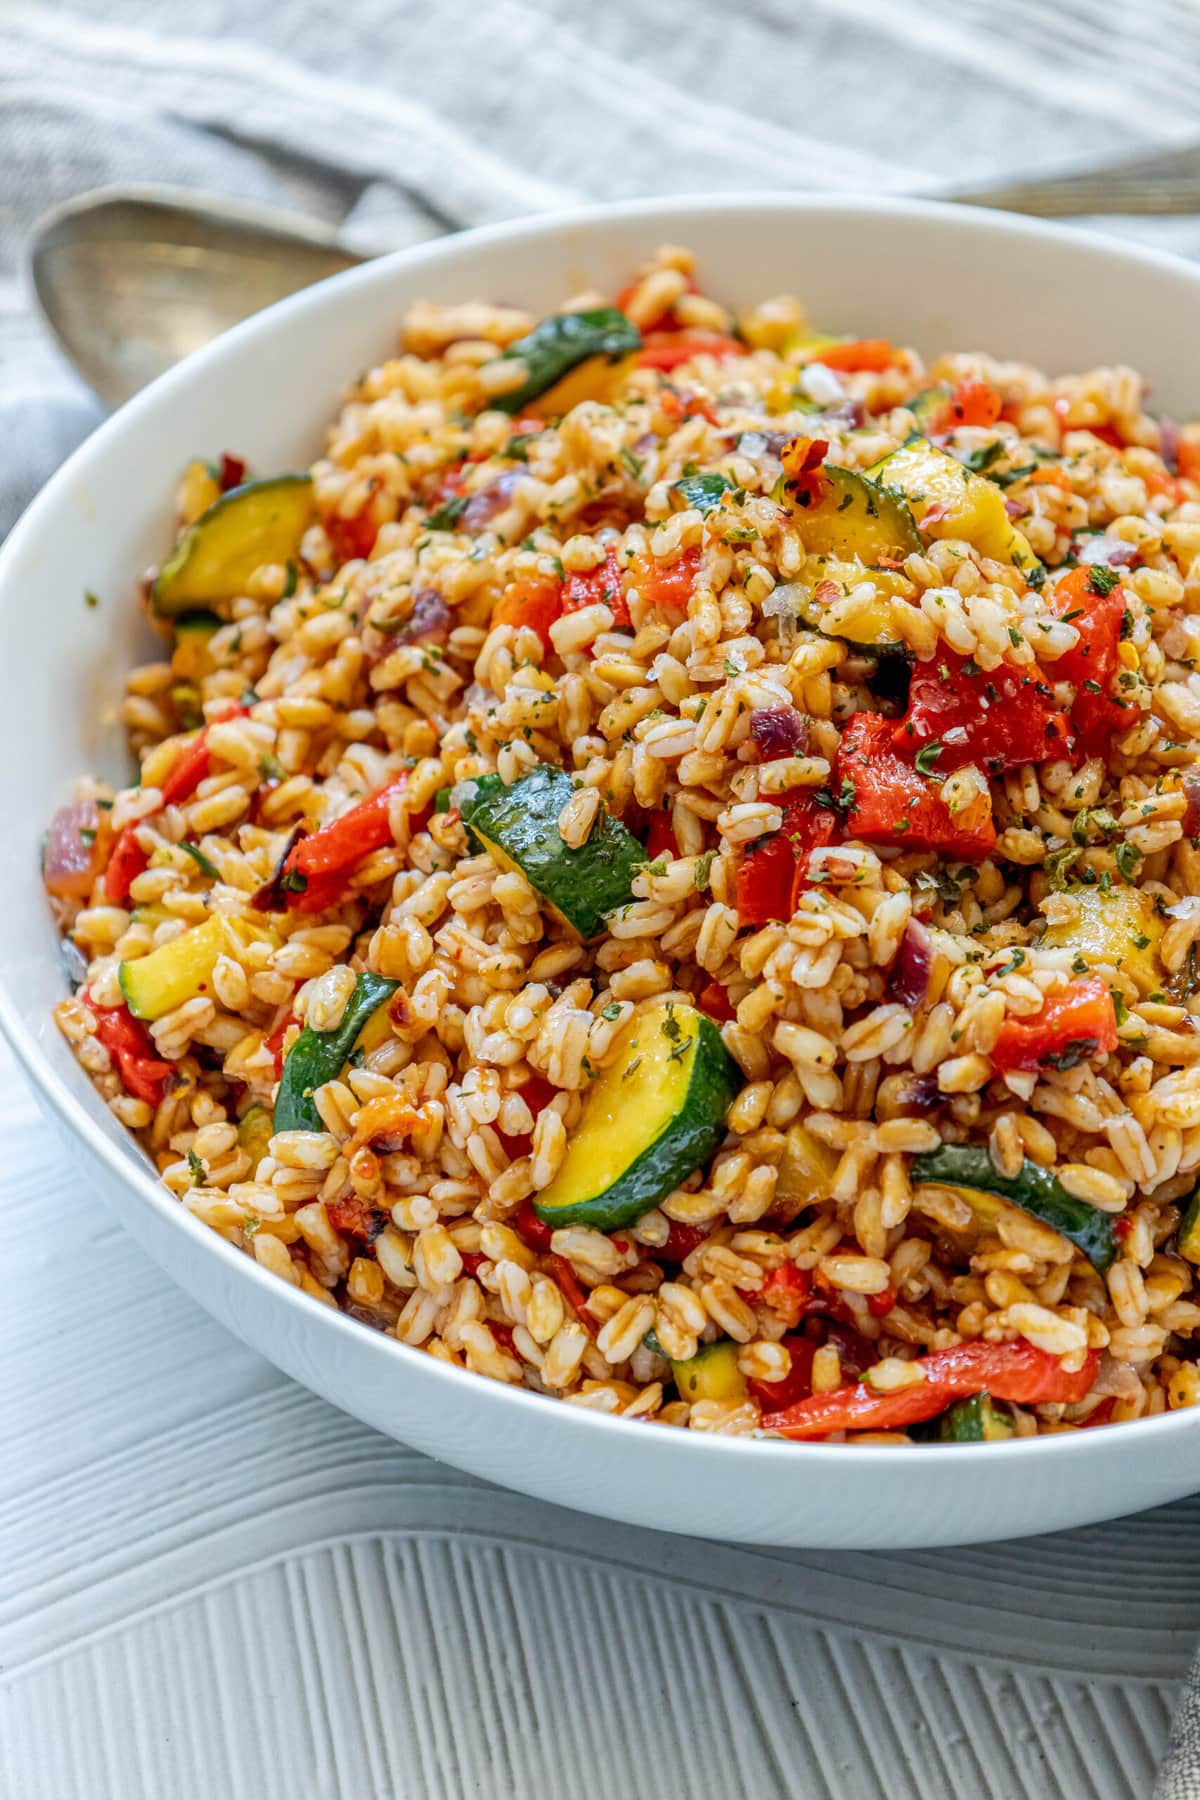 picture of farro salad with zucchini, red onion, red pepper, and herbs, in a white bowl on a table